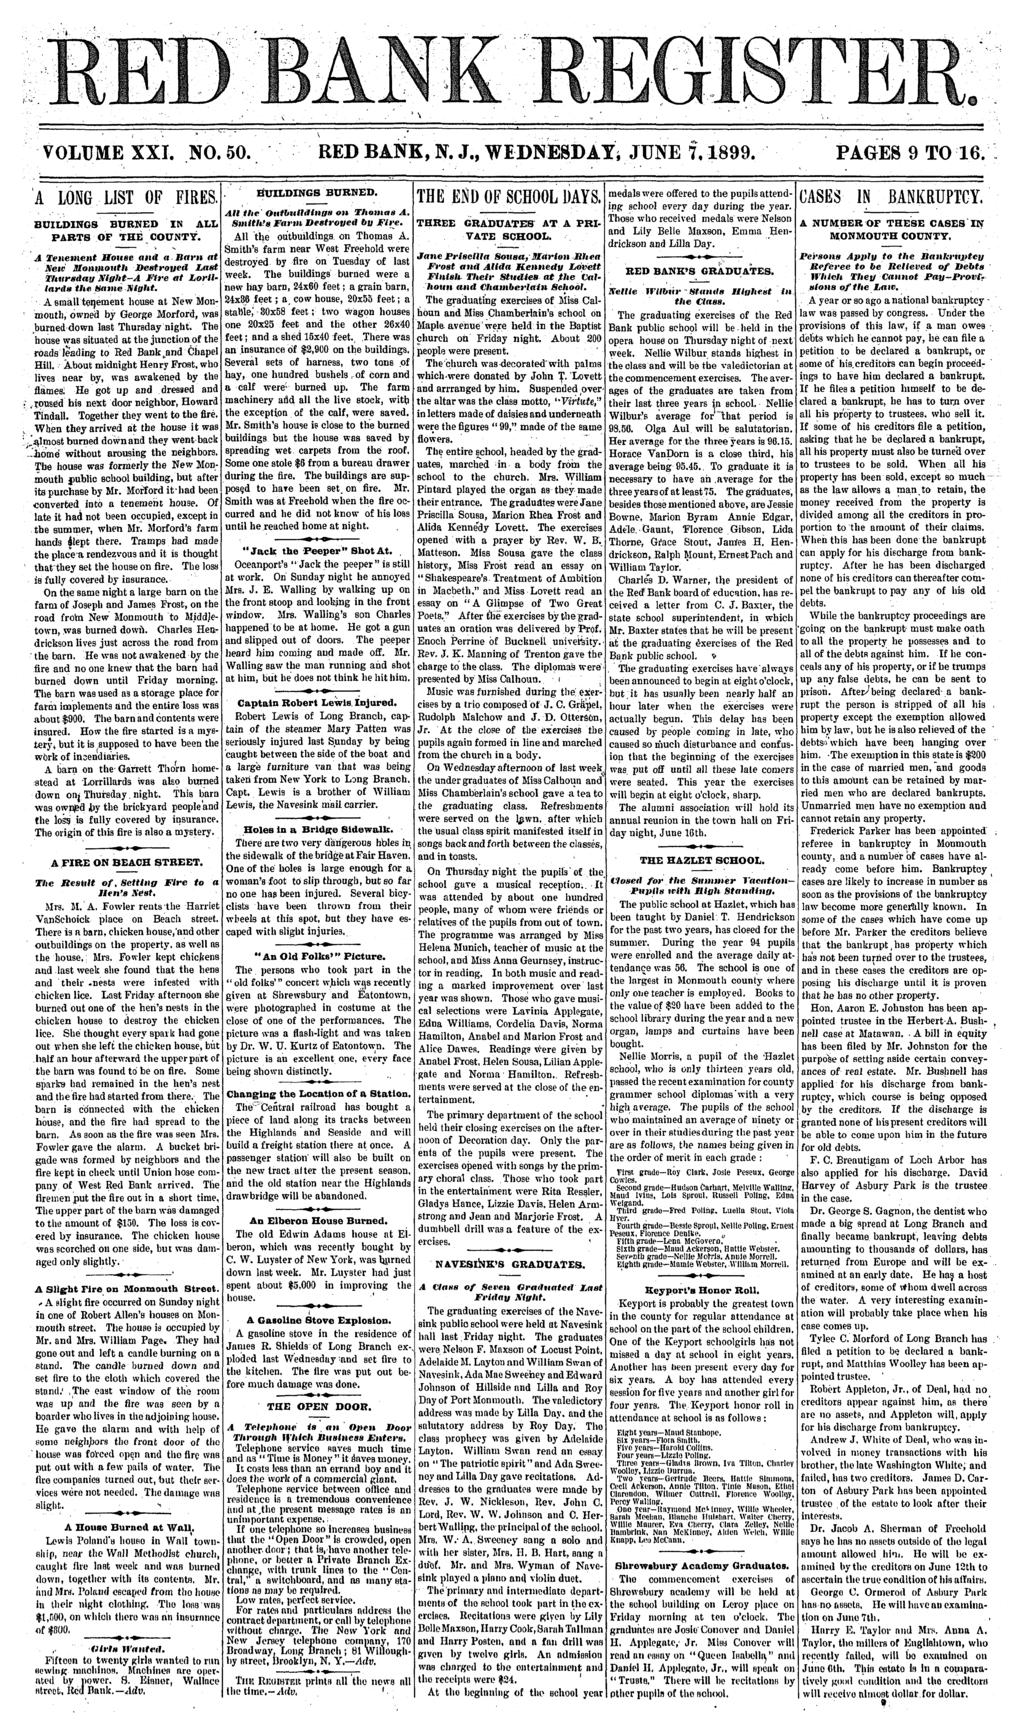 A VOLUME XXI. NO. 50. RED BANK, N. J., WEDNESDA JUNE f, 1899. PAGES 9 TO 16. LONG LIST OF FIRES. BUILDINGS BURNED IN ALL PARTS OF THE COUNT.